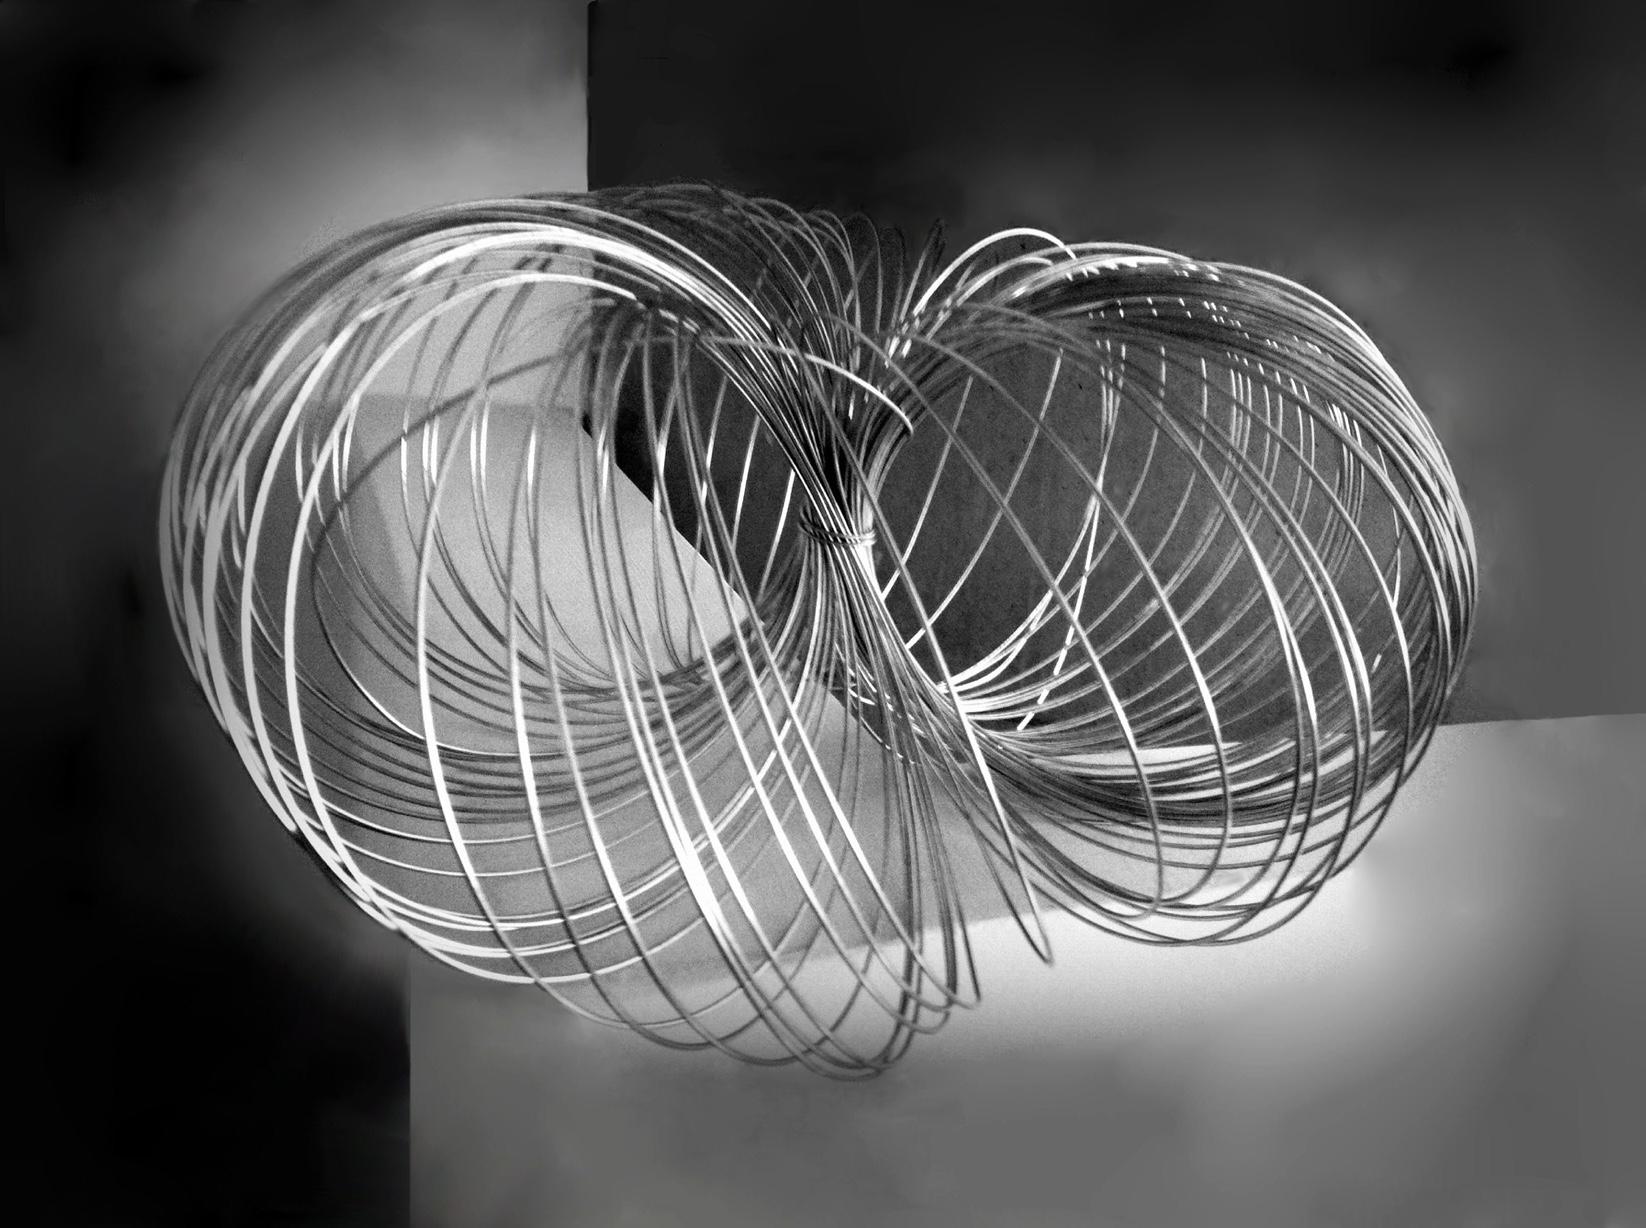 Monochrome image of coiled wire in space